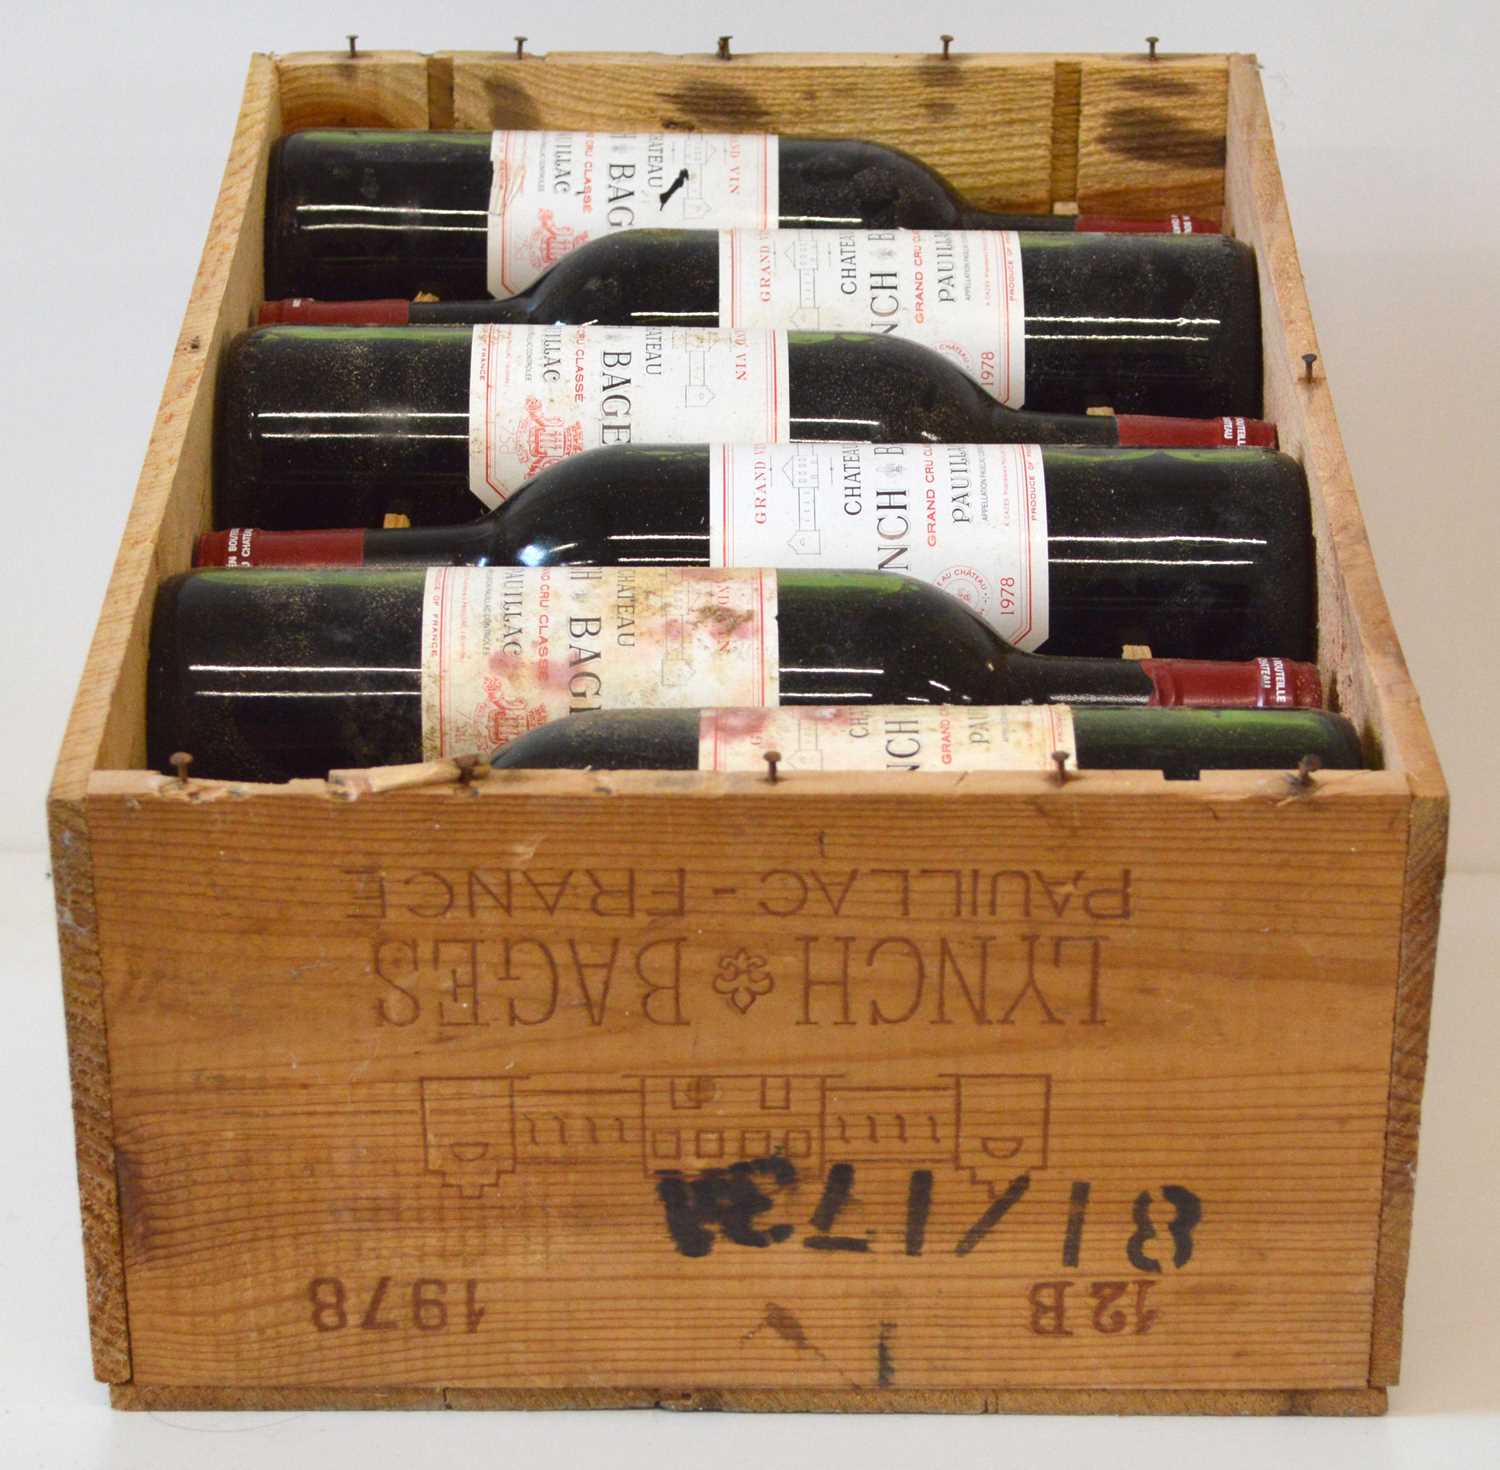 Lot 8 - 12 bottles in previously unopened OWC Chateau Lynch Bages Grand Cru Classe Pauillac Vintage 1978